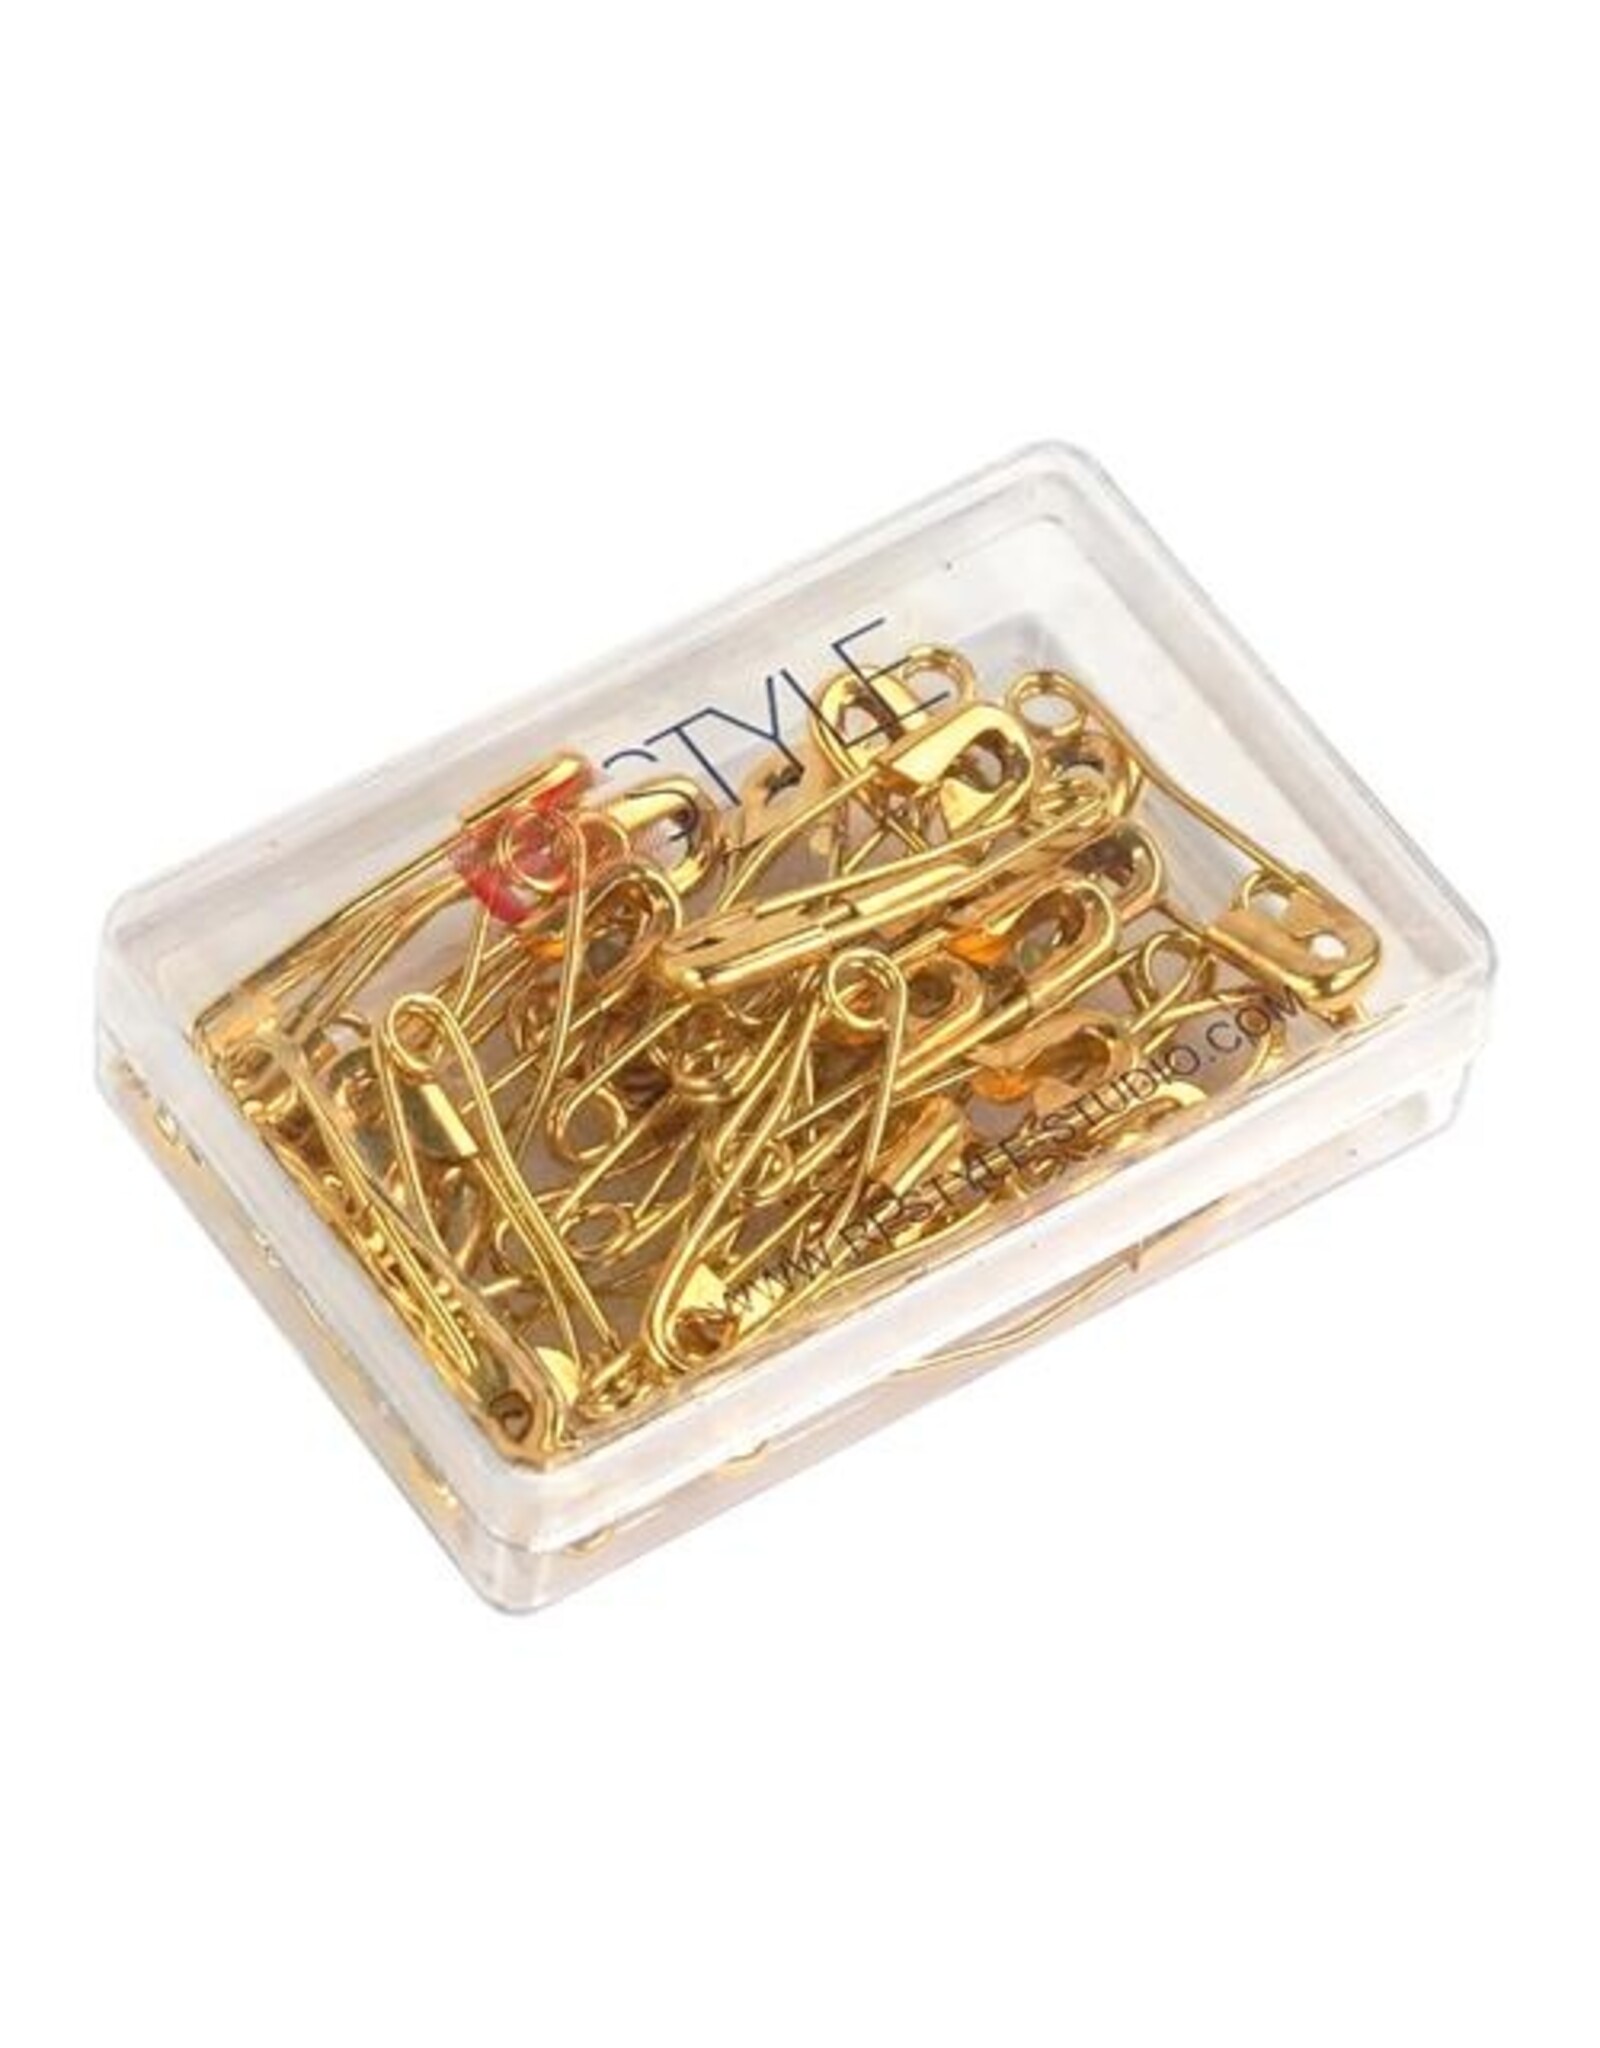 Restyle Safety Pins - curved - 27 mm - Basting Pins - 36 pieces